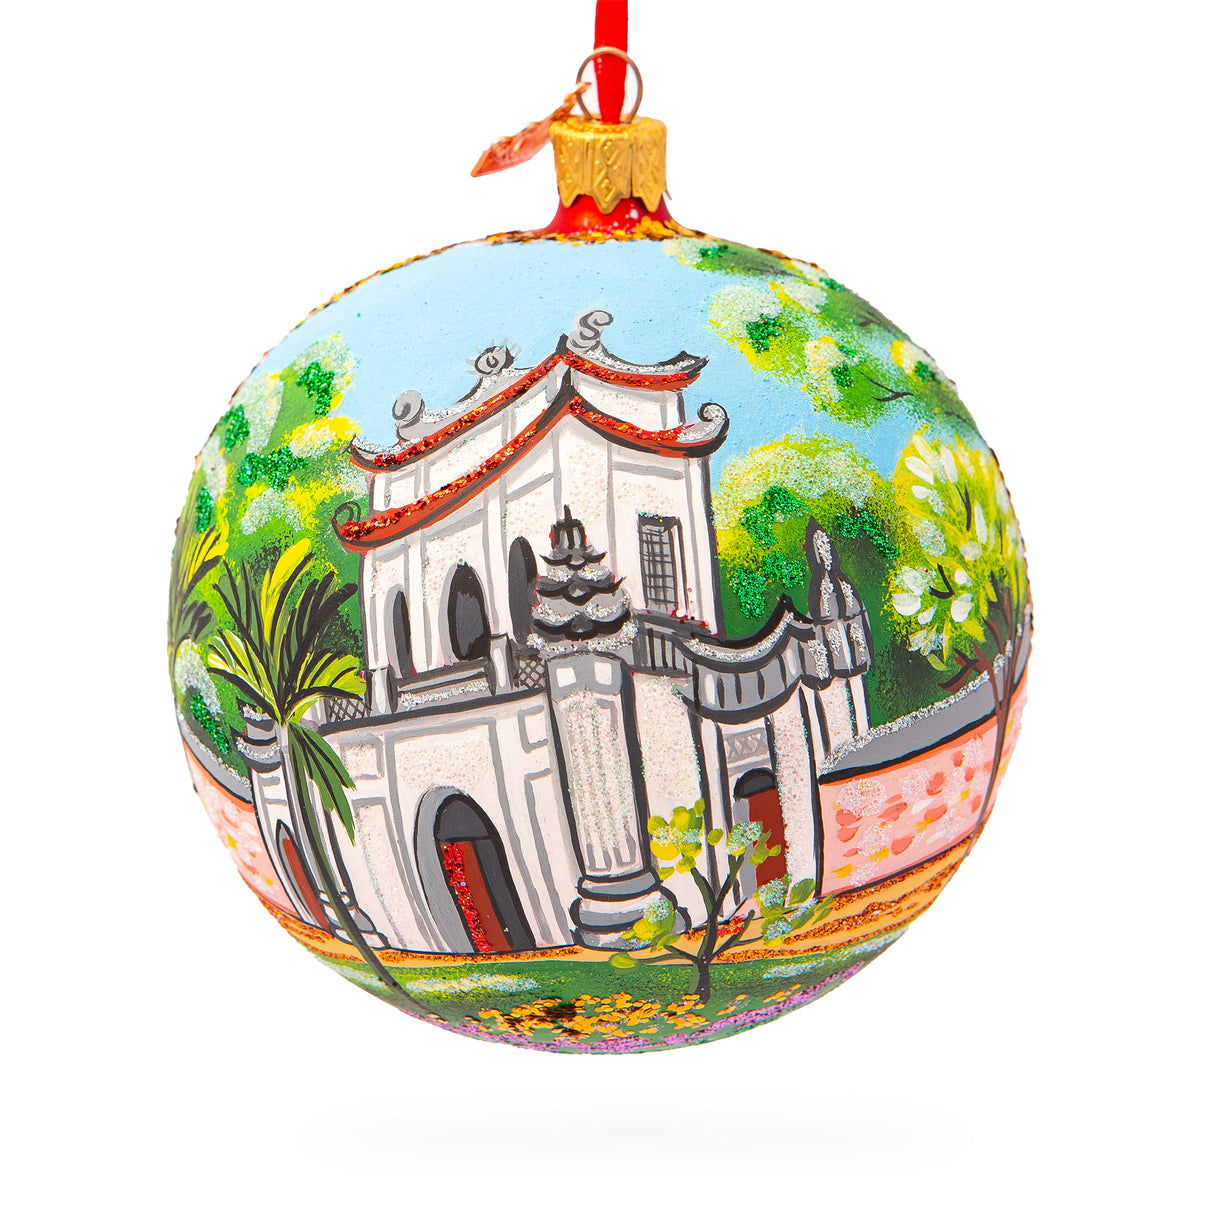 Temple of Literature & National University, Hanoi, Vietnam Glass Ball Christmas Ornament 4 Inches in Multi color, Round shape